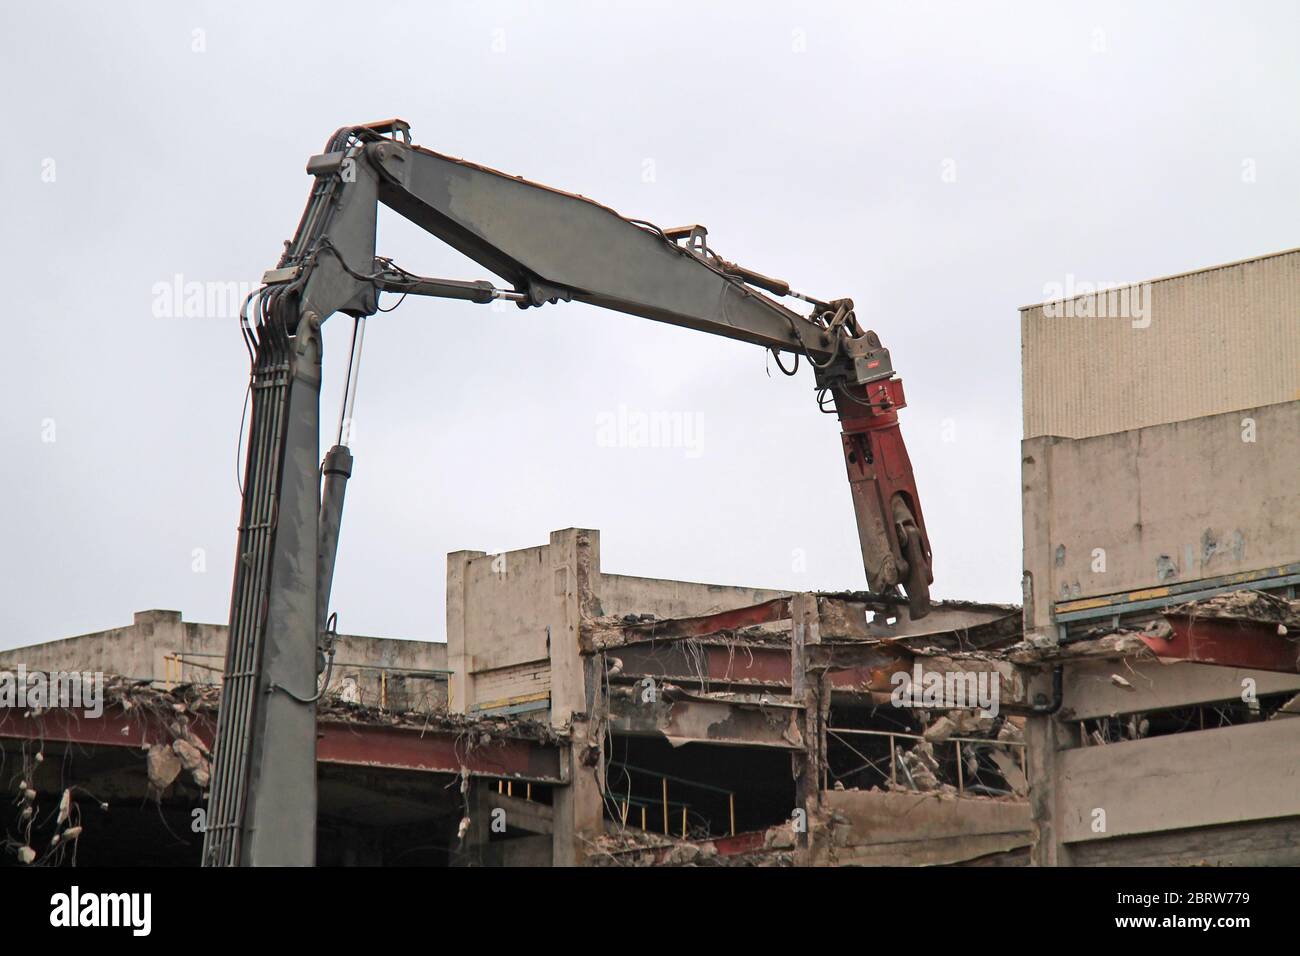 A Pulveriser Machine Pulling Out a Building Steel Girder. Stock Photo